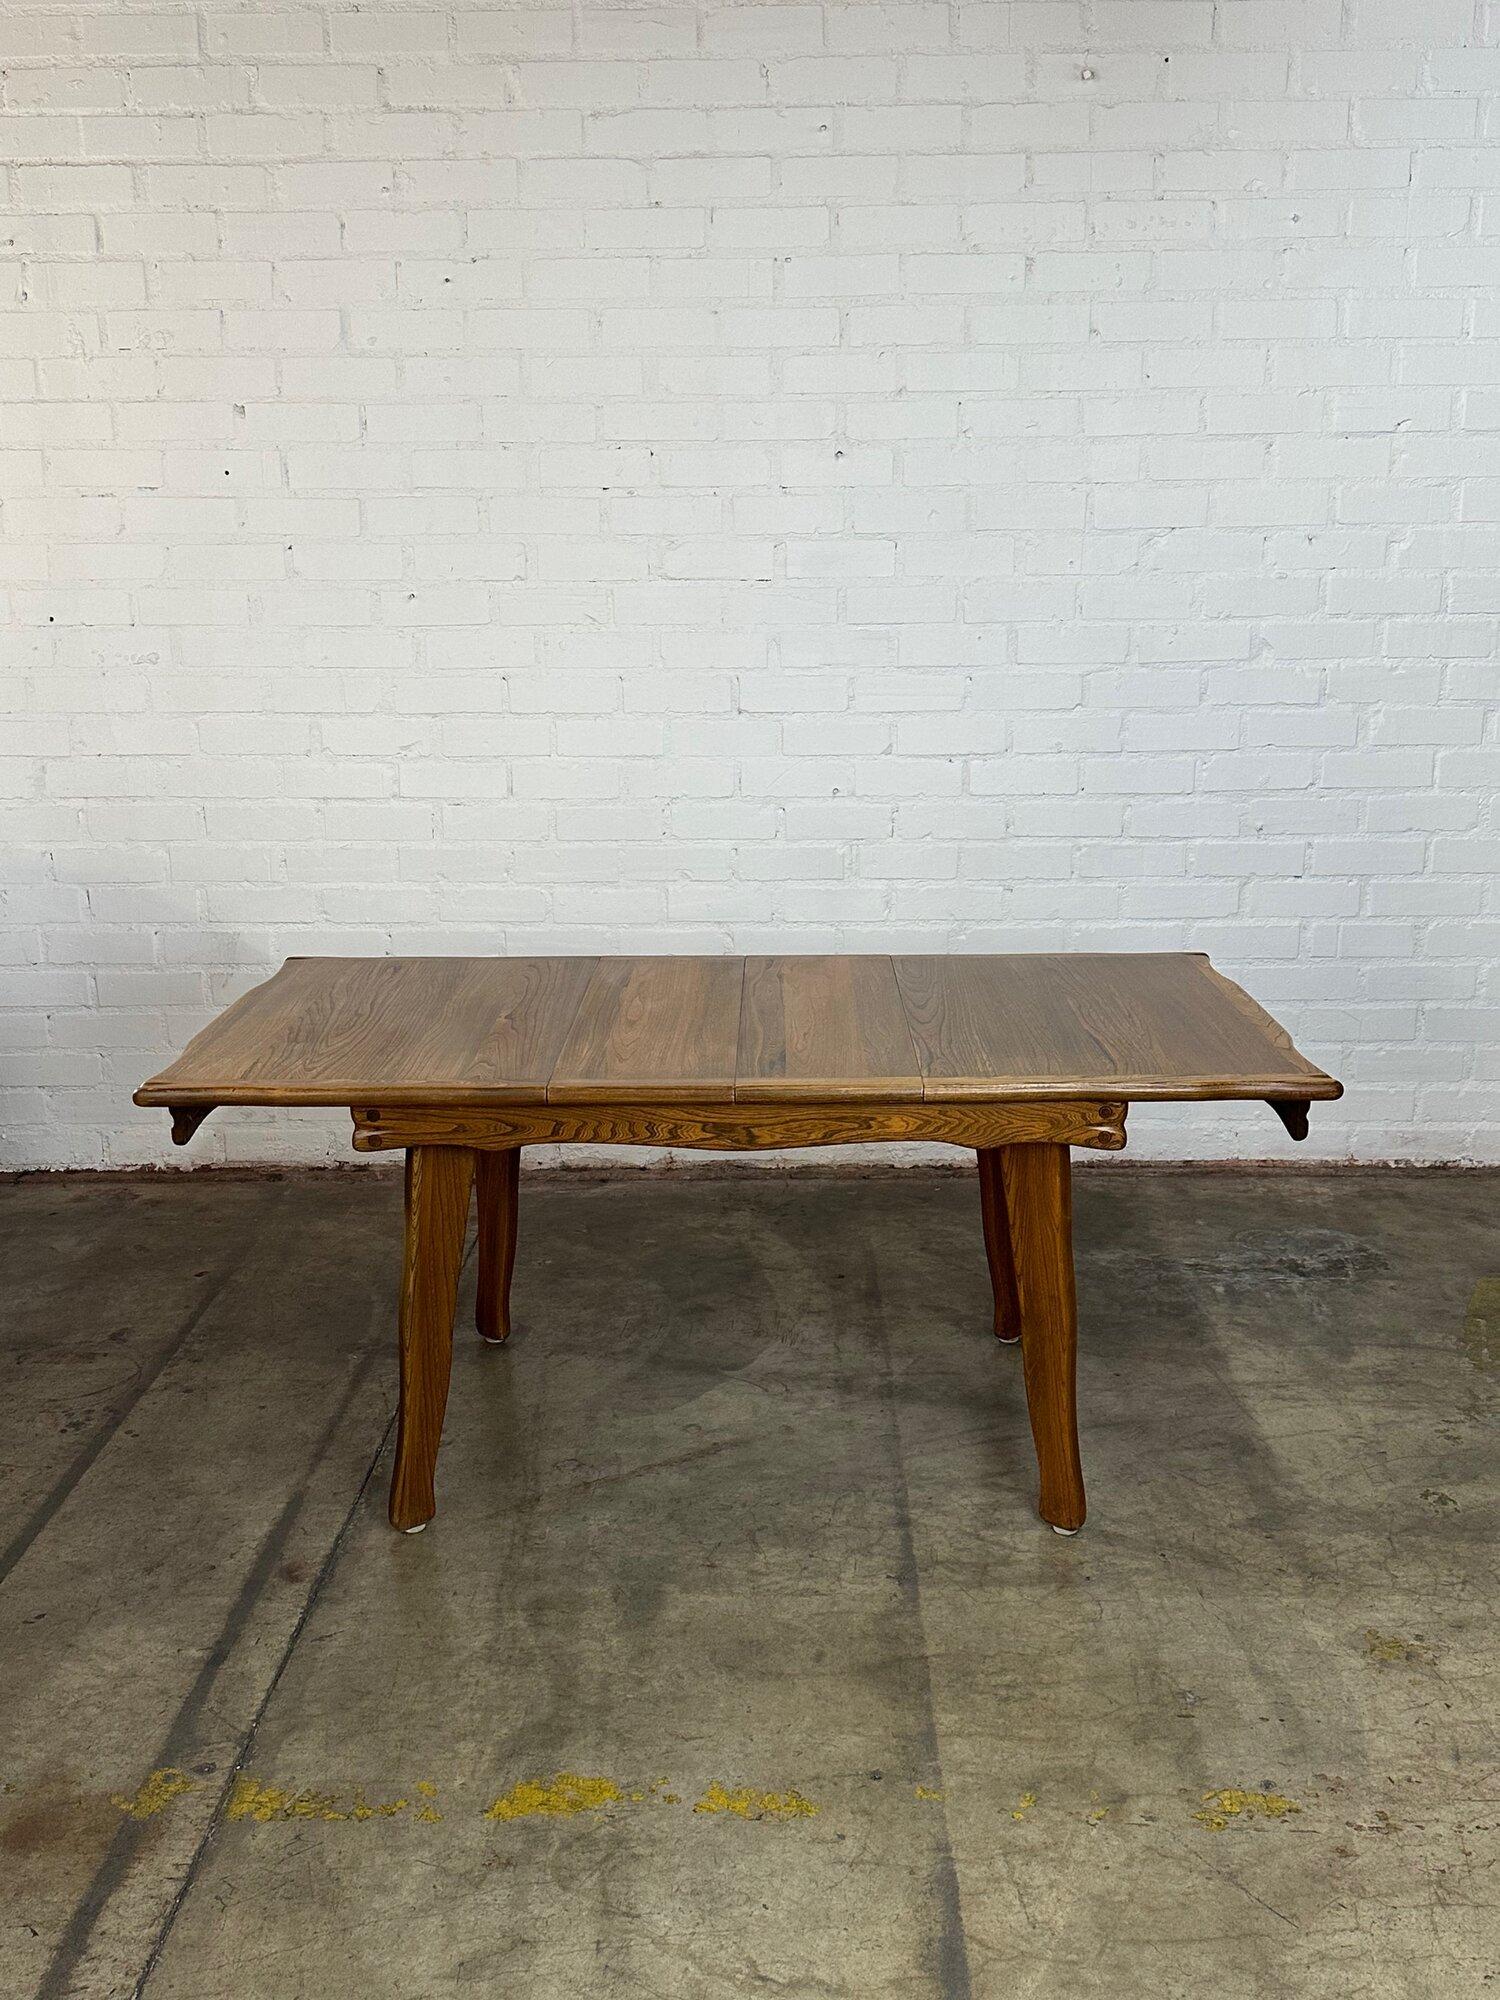 W70 D35 H30 KC25 Leaf W11

Fully restored dining table with great curvy edges and legs. Item is in fully restored condition with no major areas of wear.  Table comes one extension, table is structurally sound and sturdy. 